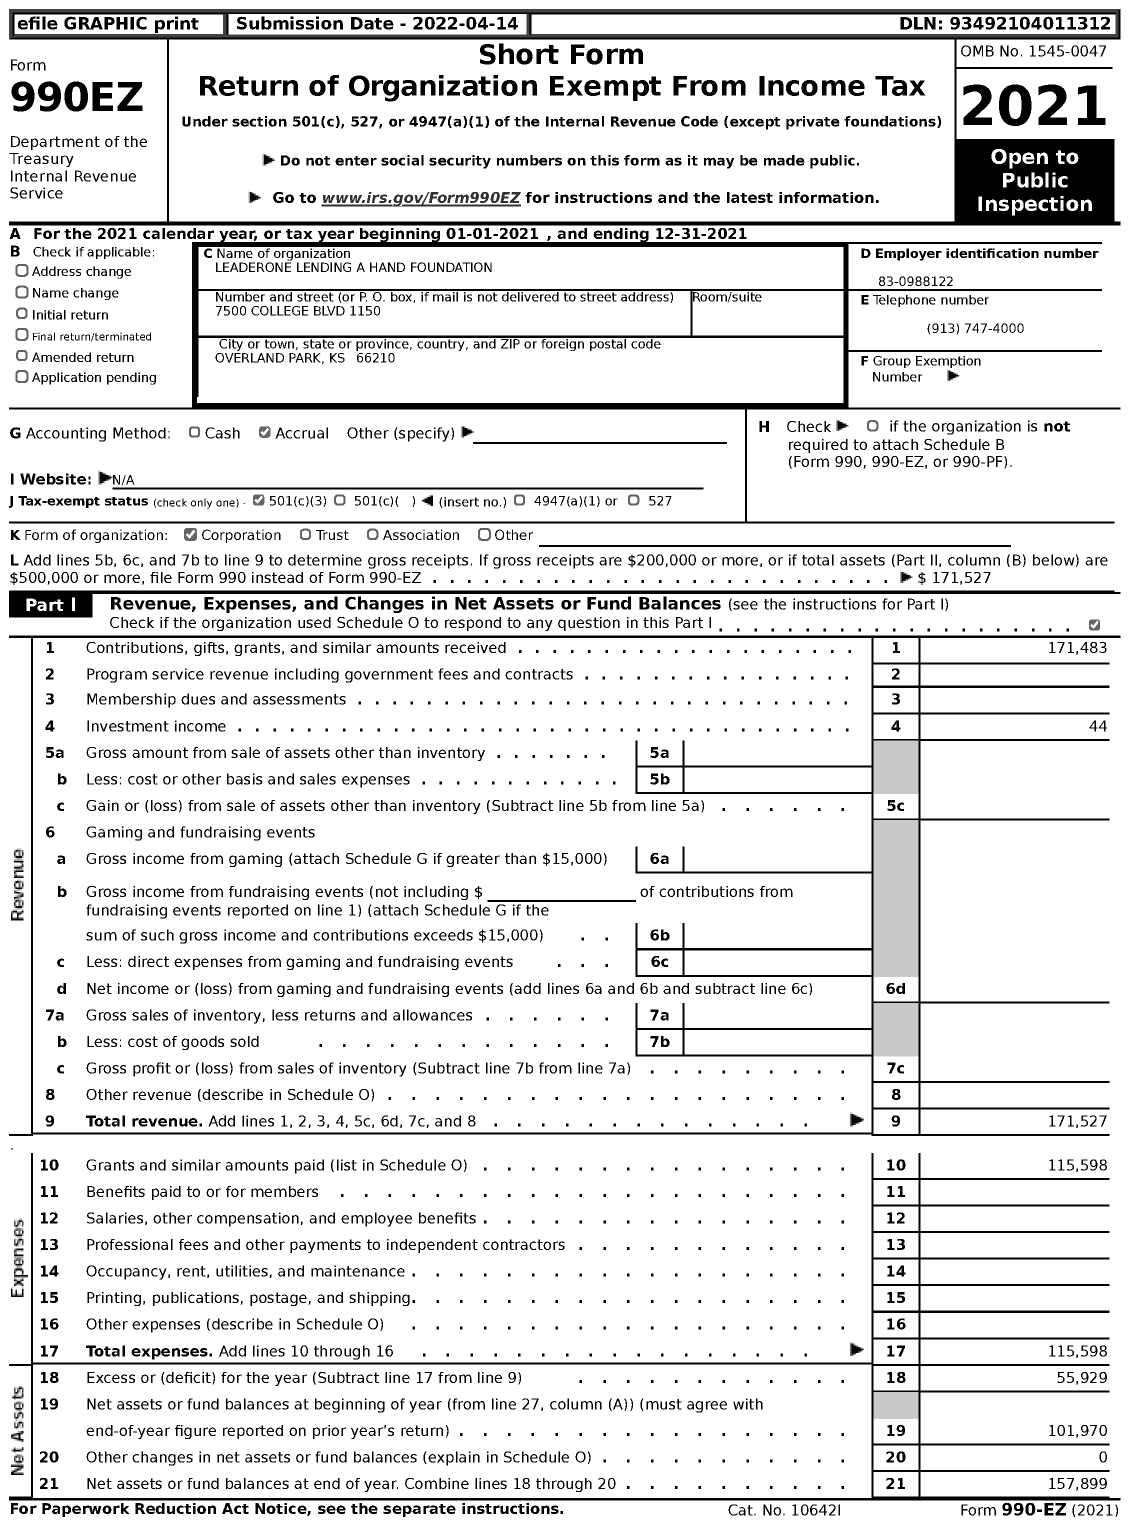 Image of first page of 2021 Form 990EZ for Leaderone Lending A Hand Foundation